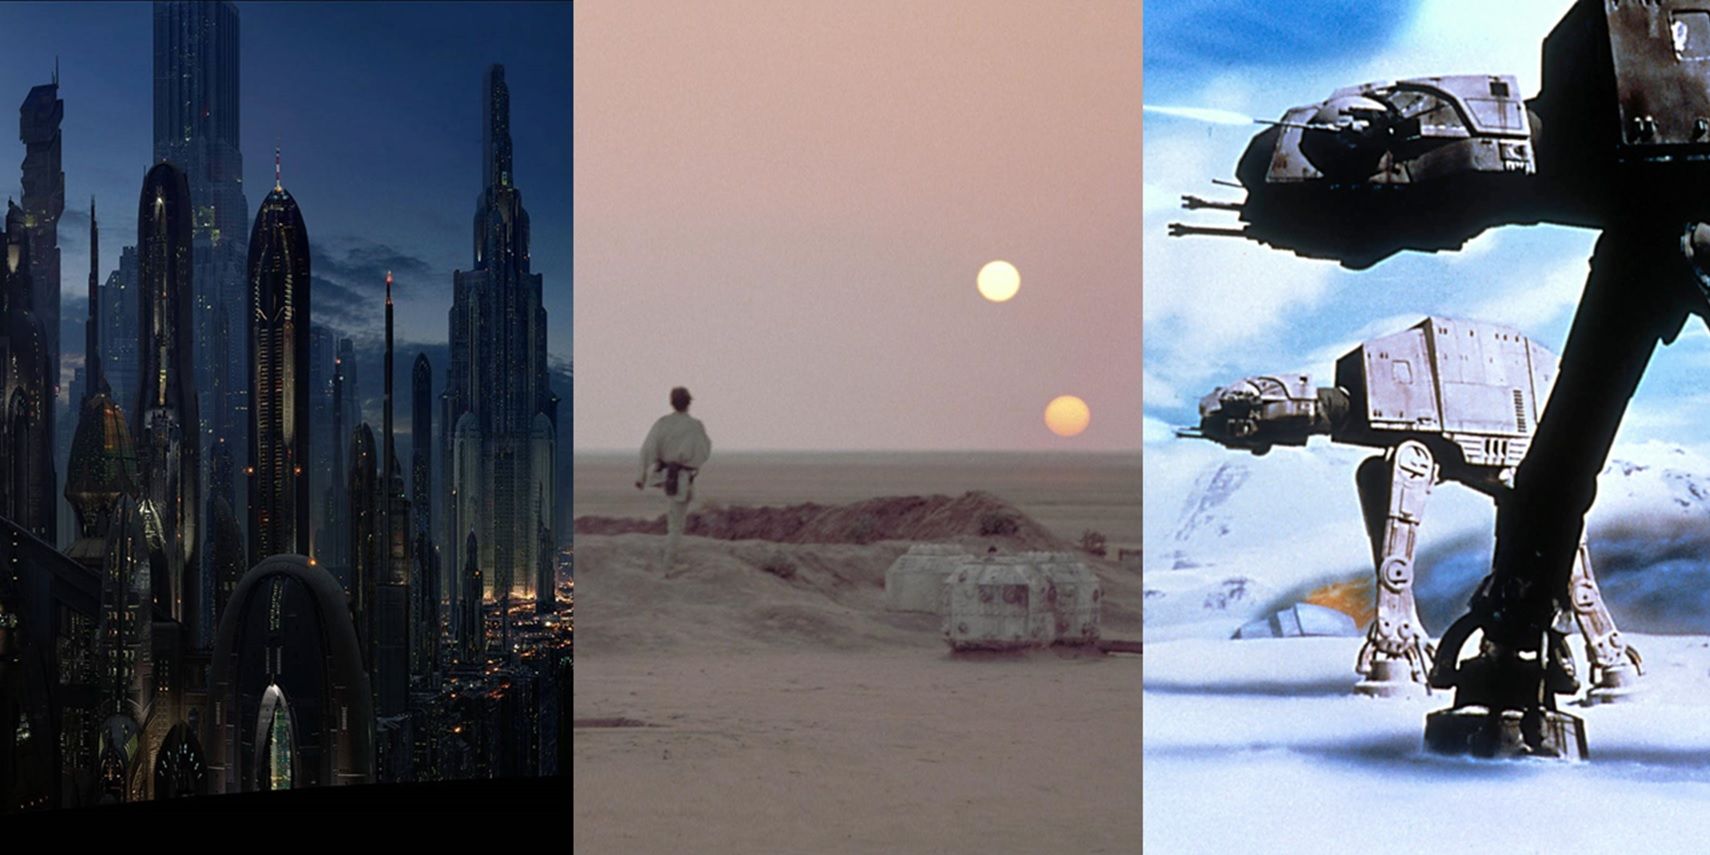 Star Wars Planets, Ranked: From Coruscant to Tatooine